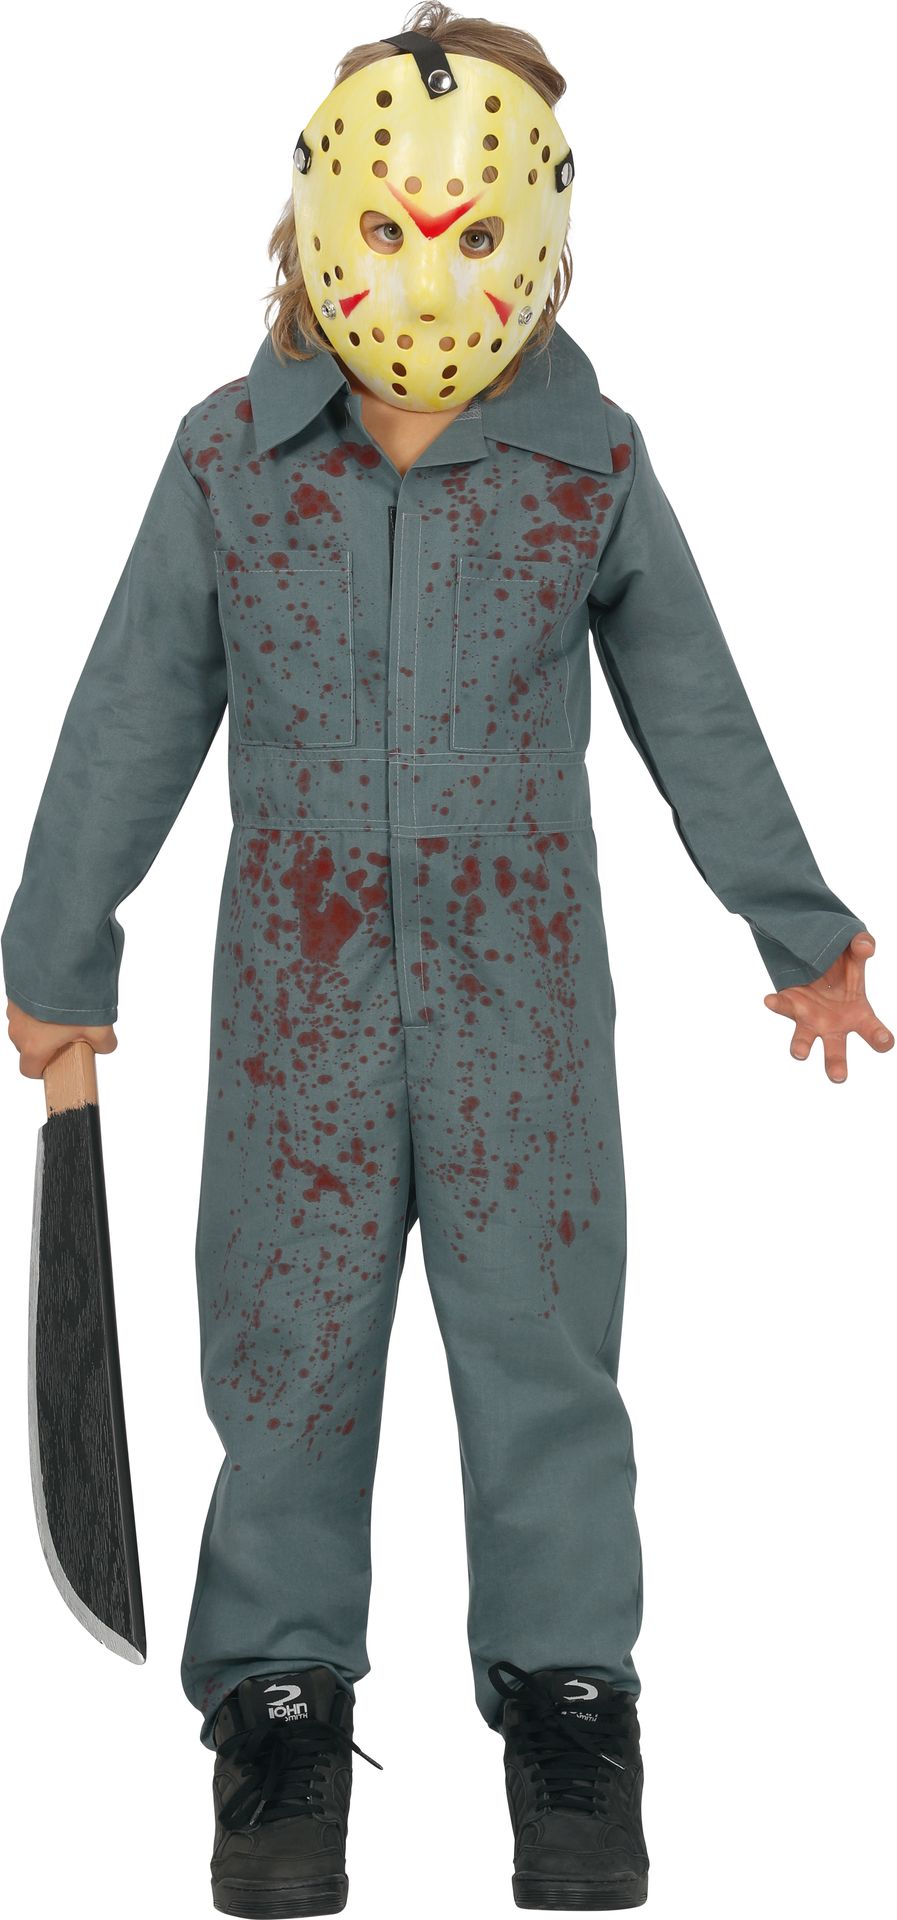 Friday the 13th outfit jongens